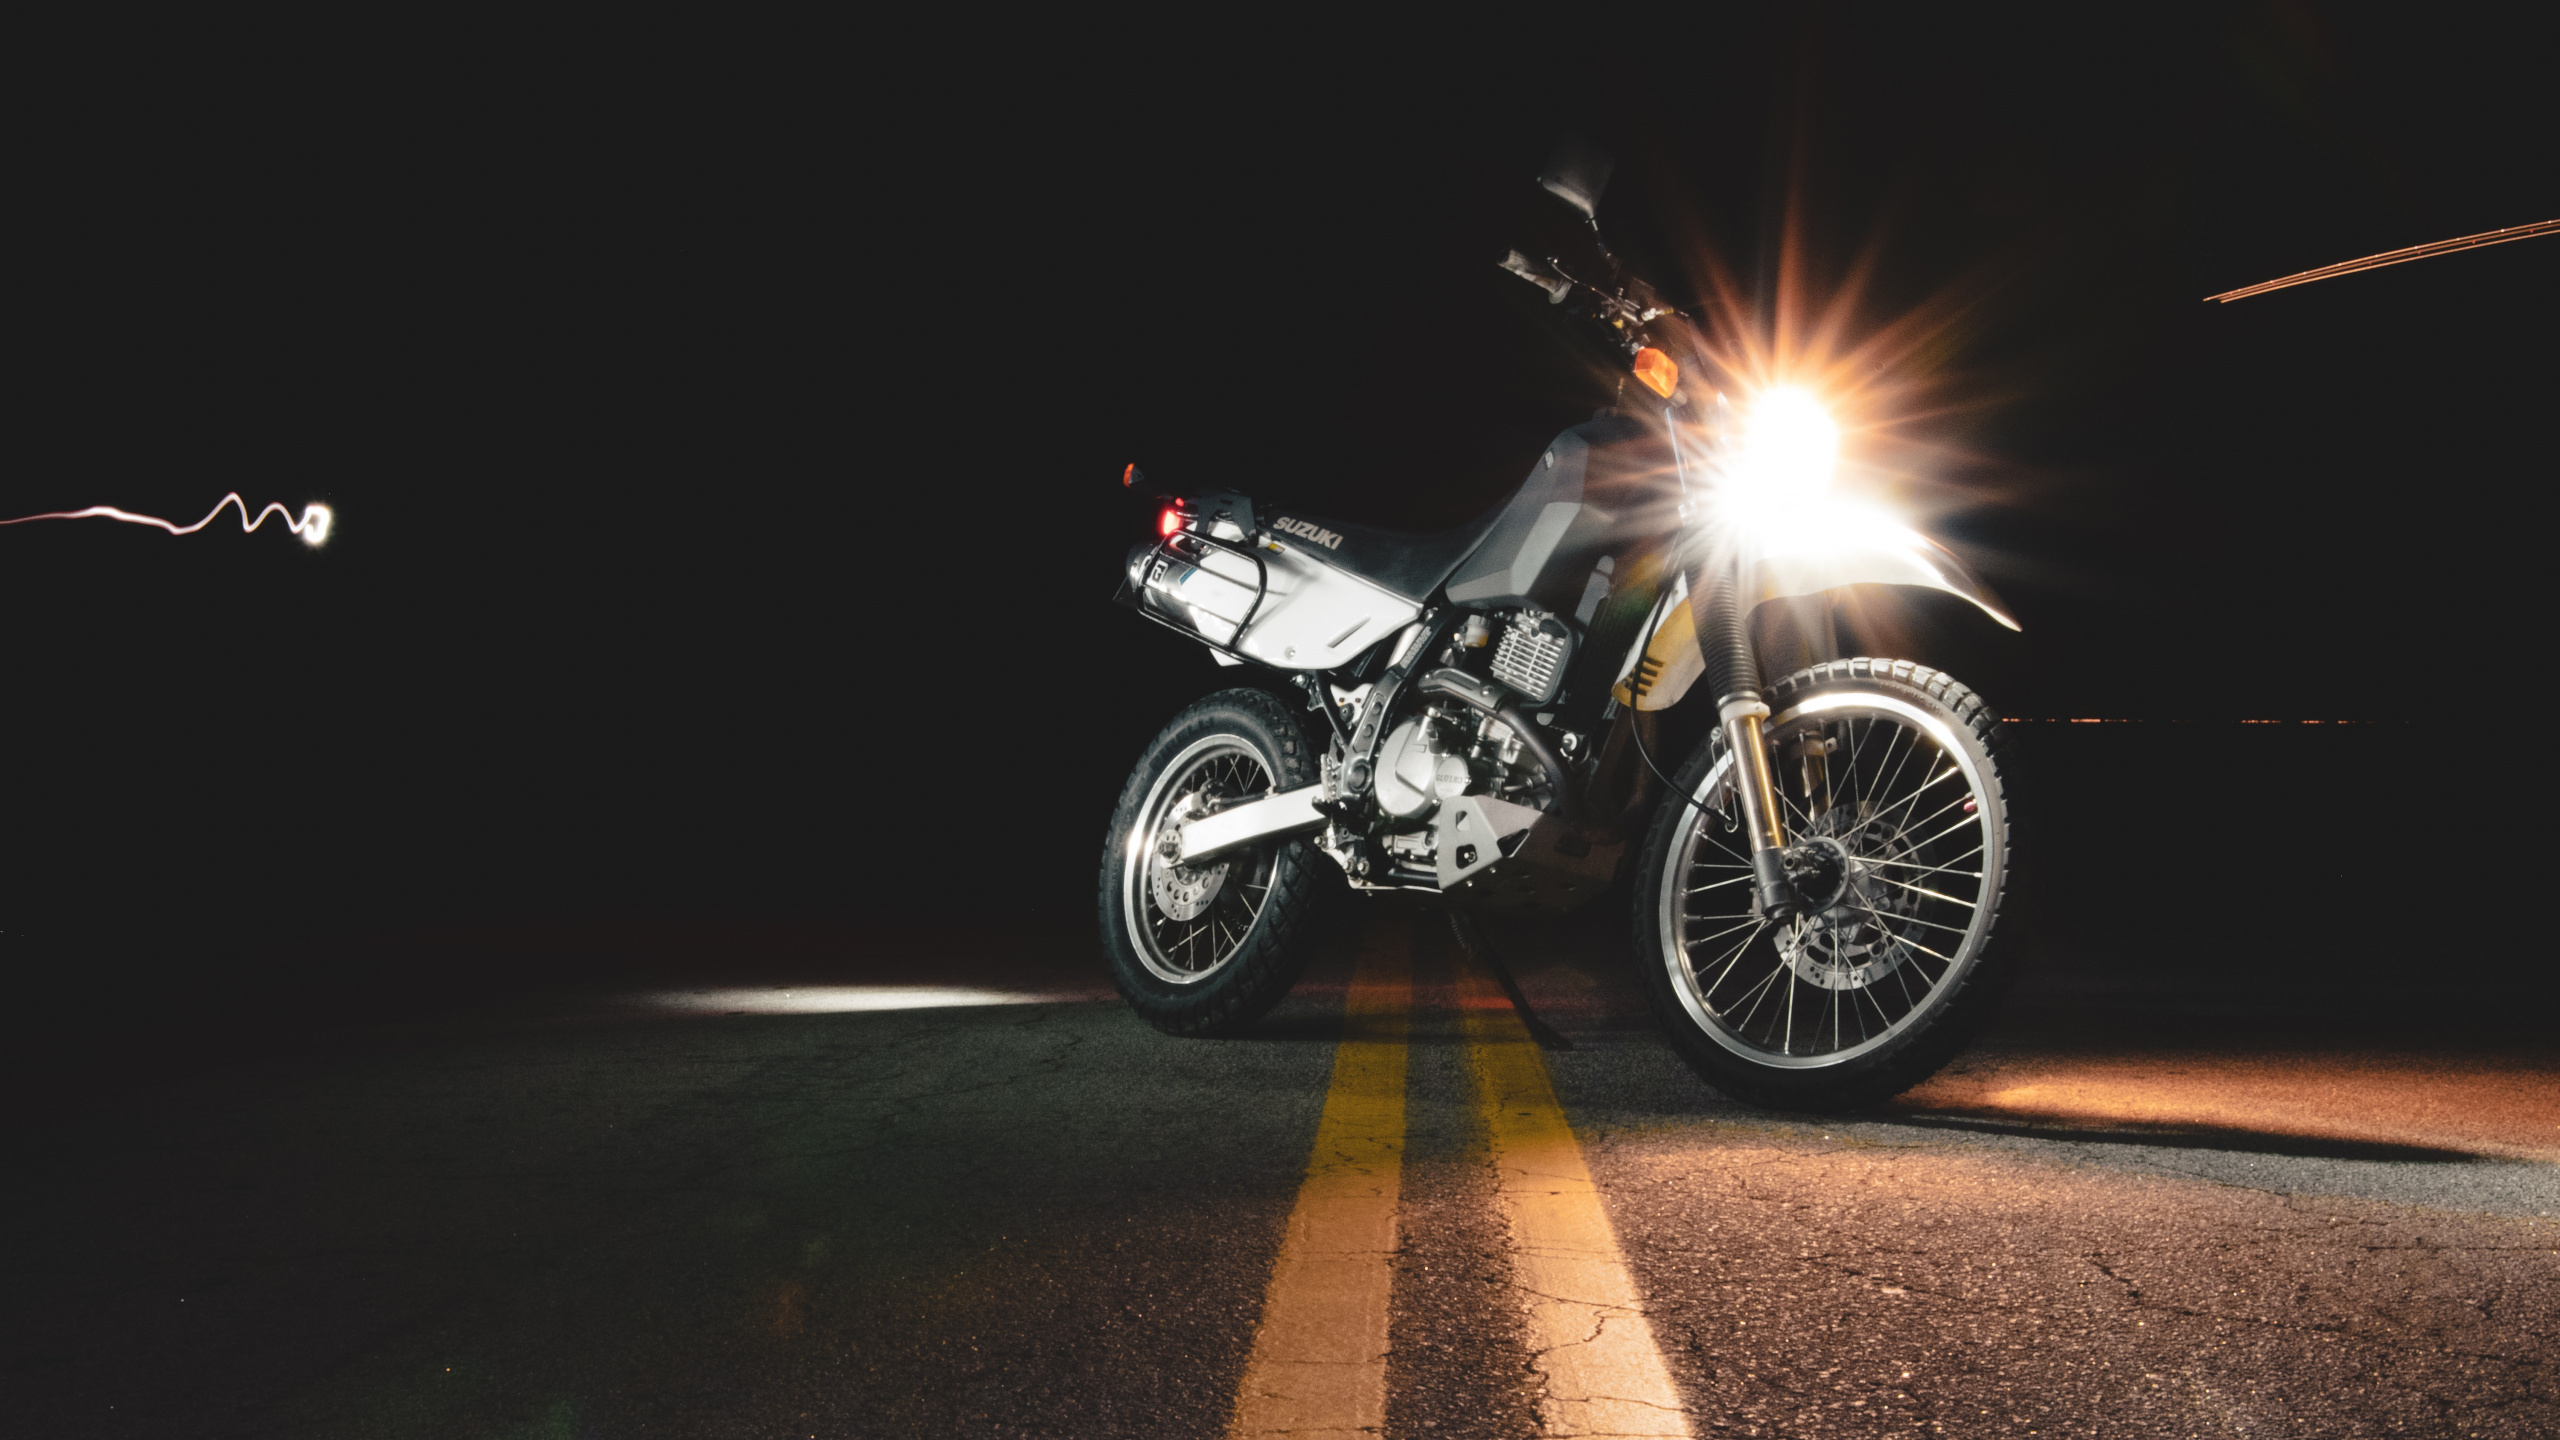 Black and Silver Motorcycle on Road During Night Time. Wallpaper in 2560x1440 Resolution